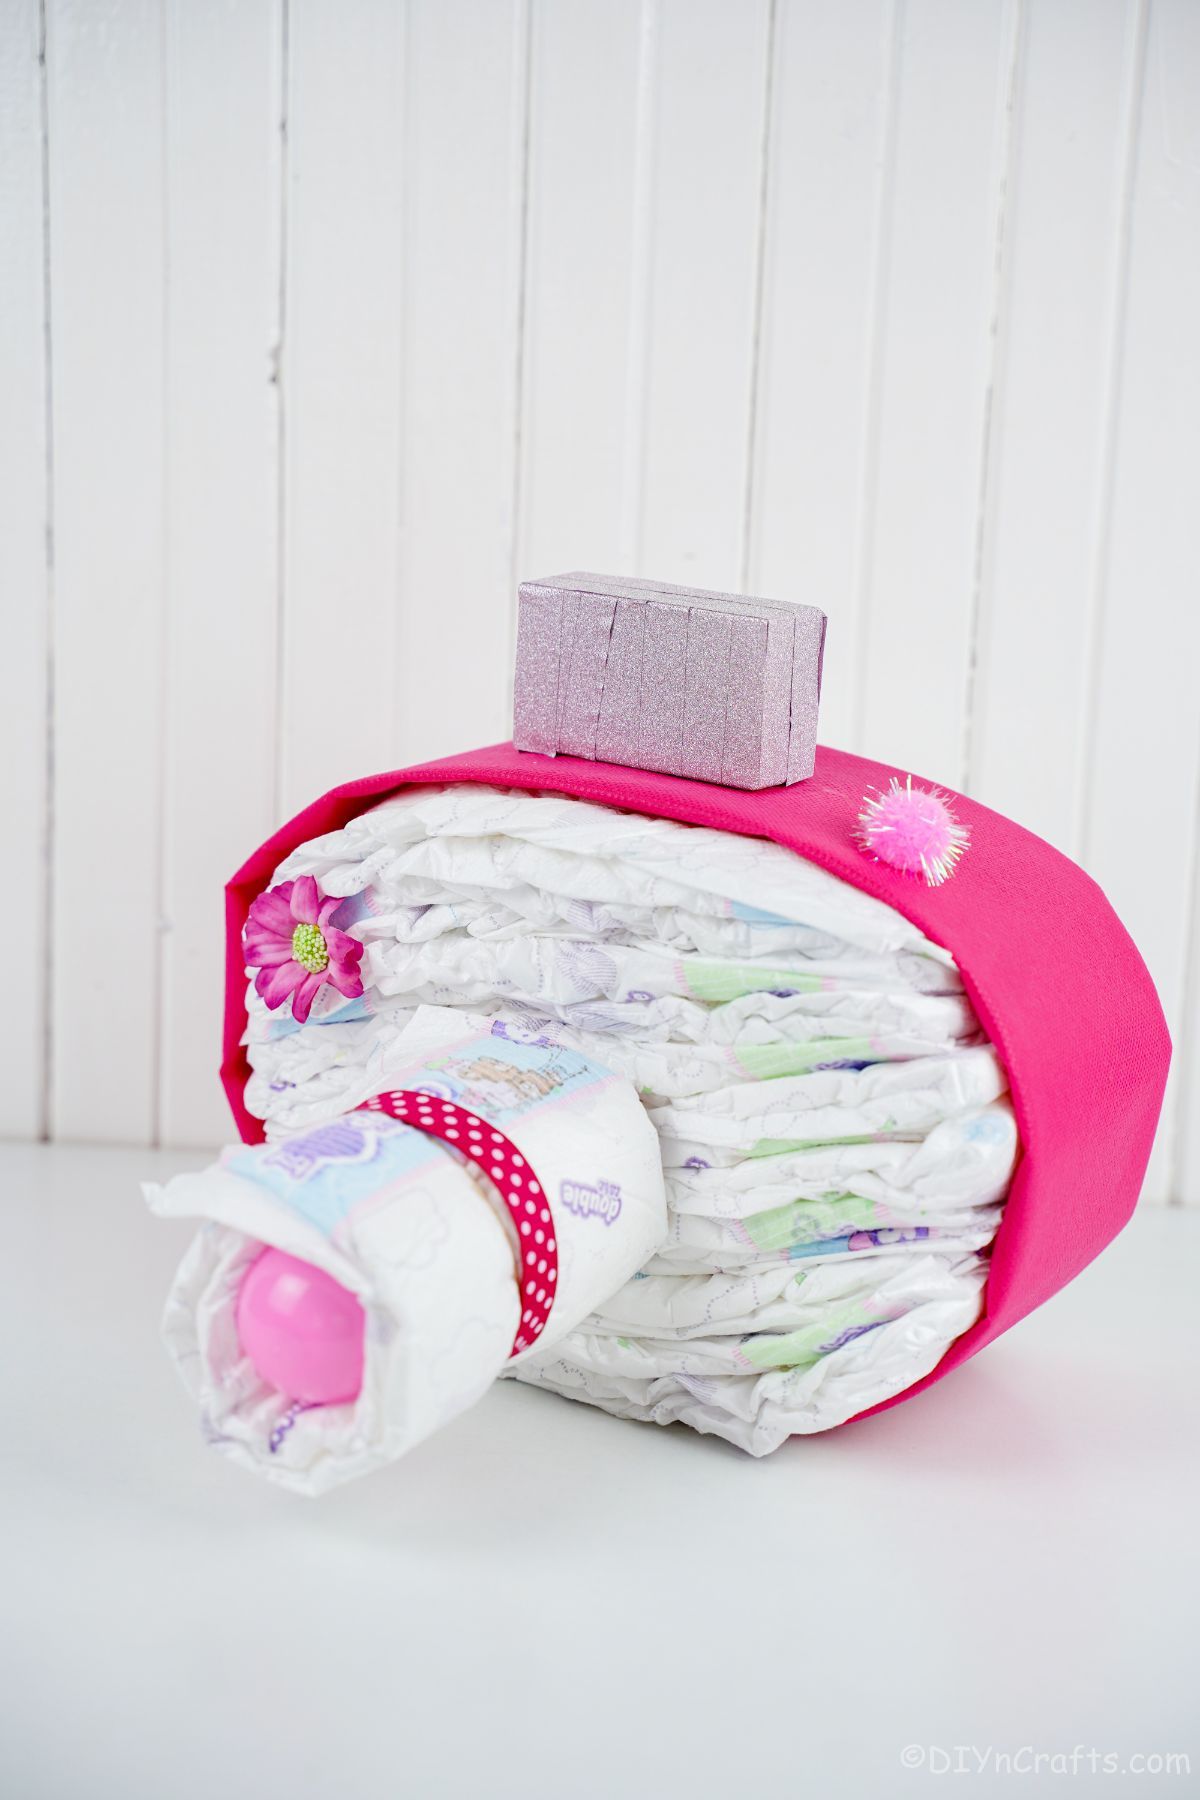 camera diaper cake with pink accents on white table with white paneling background